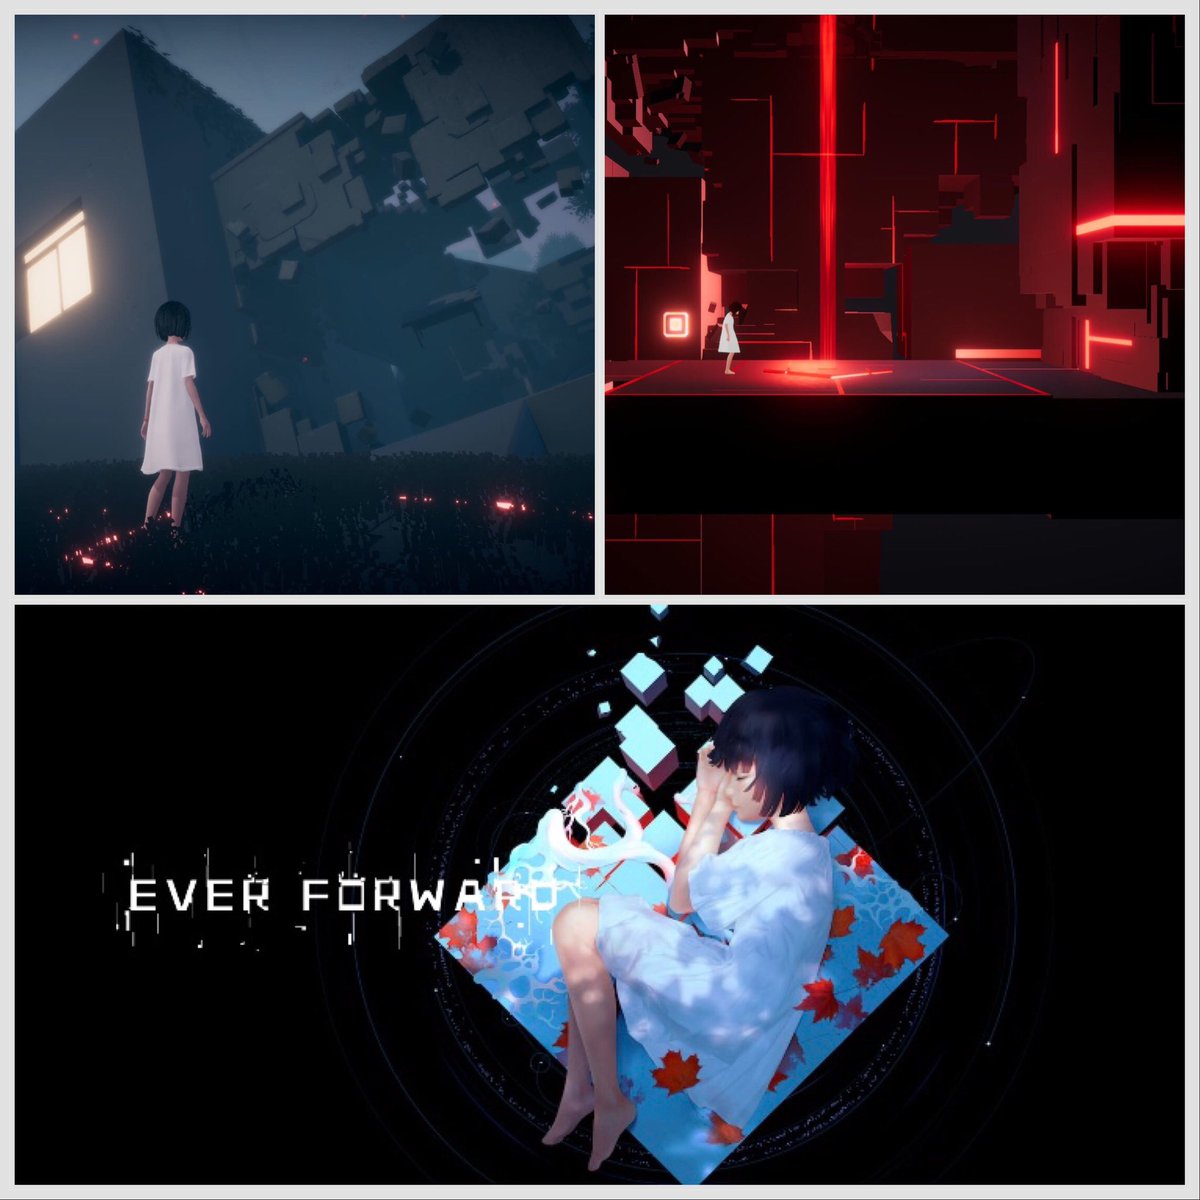 Peaceful gaming, puzzles and a platinum. #Everforward felled. #Gaming #PS5 #ProjectBacklog